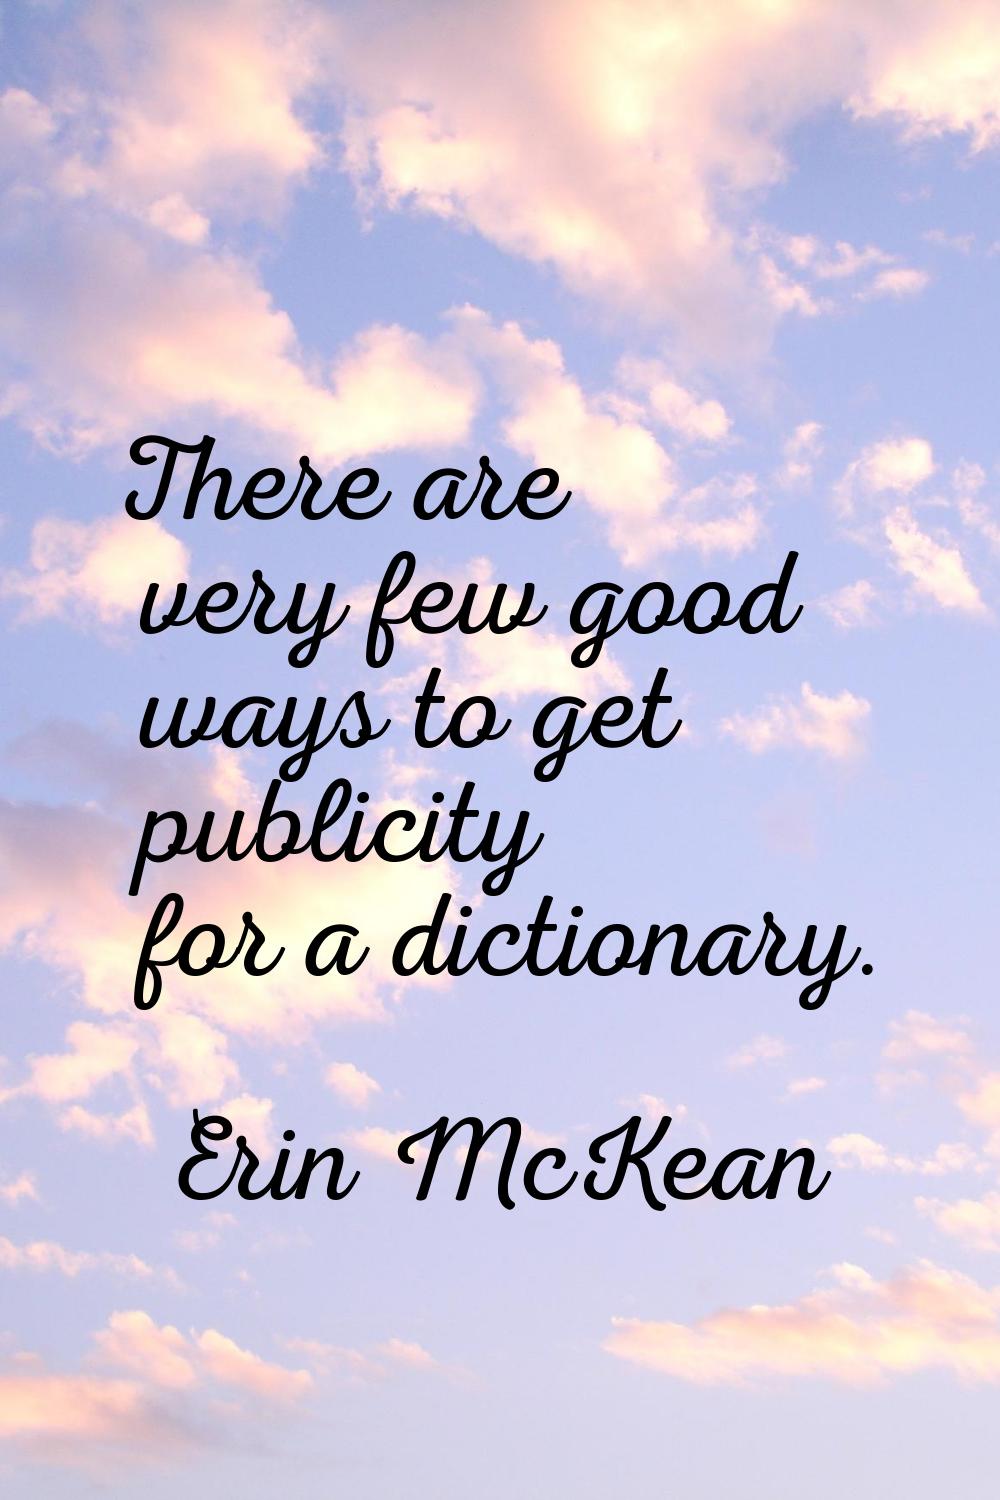 There are very few good ways to get publicity for a dictionary.